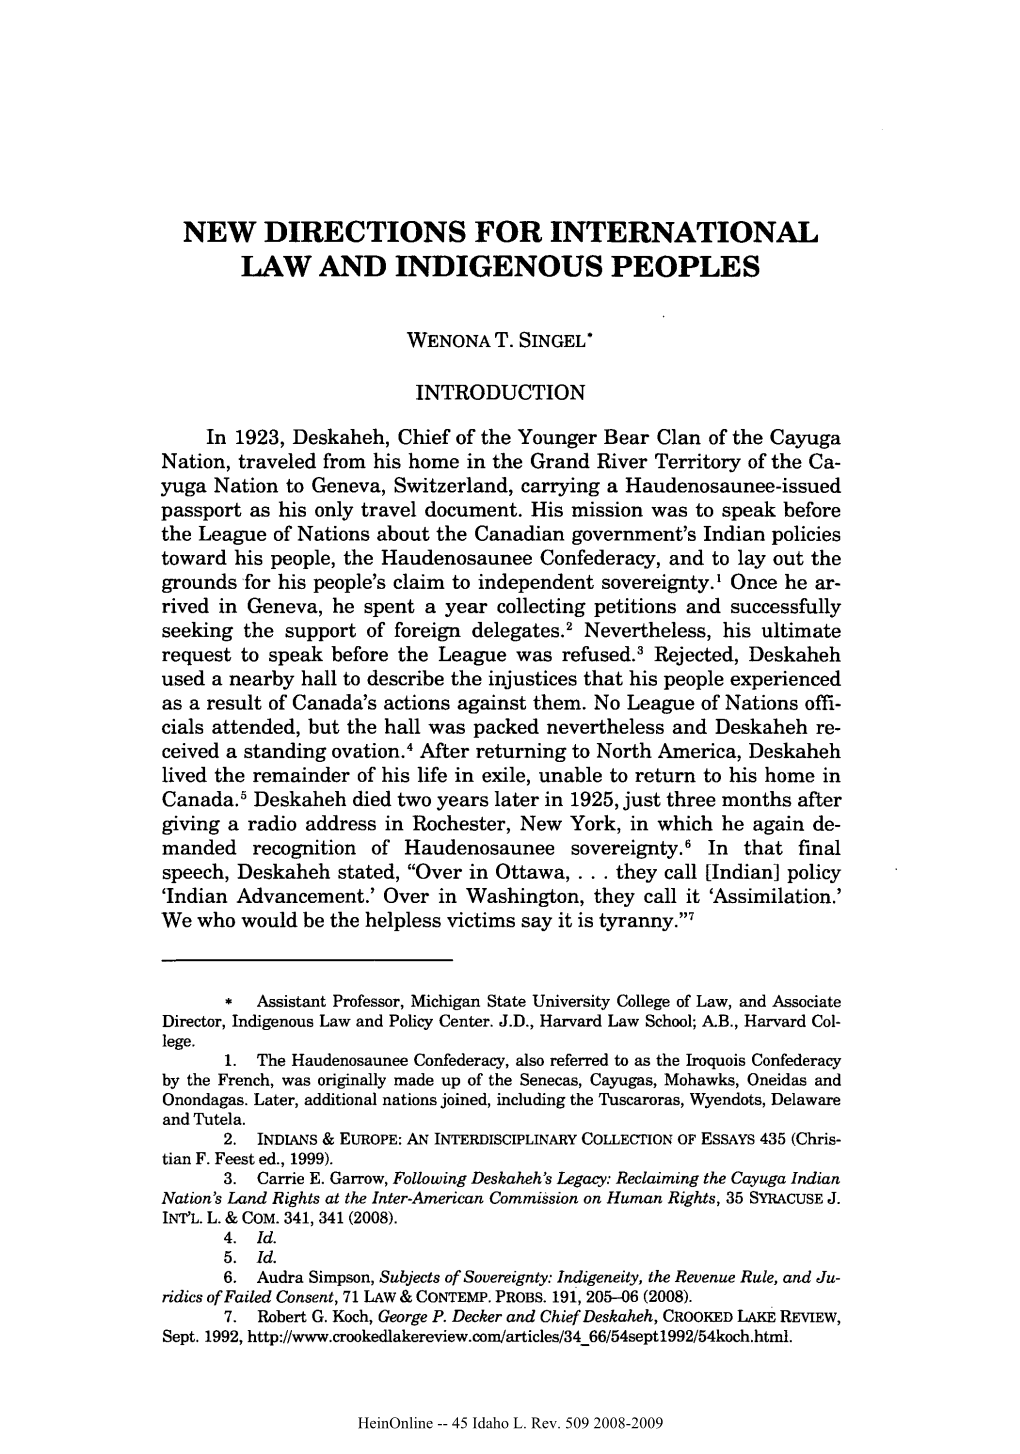 New Directions for International Law and Indigenous Peoples